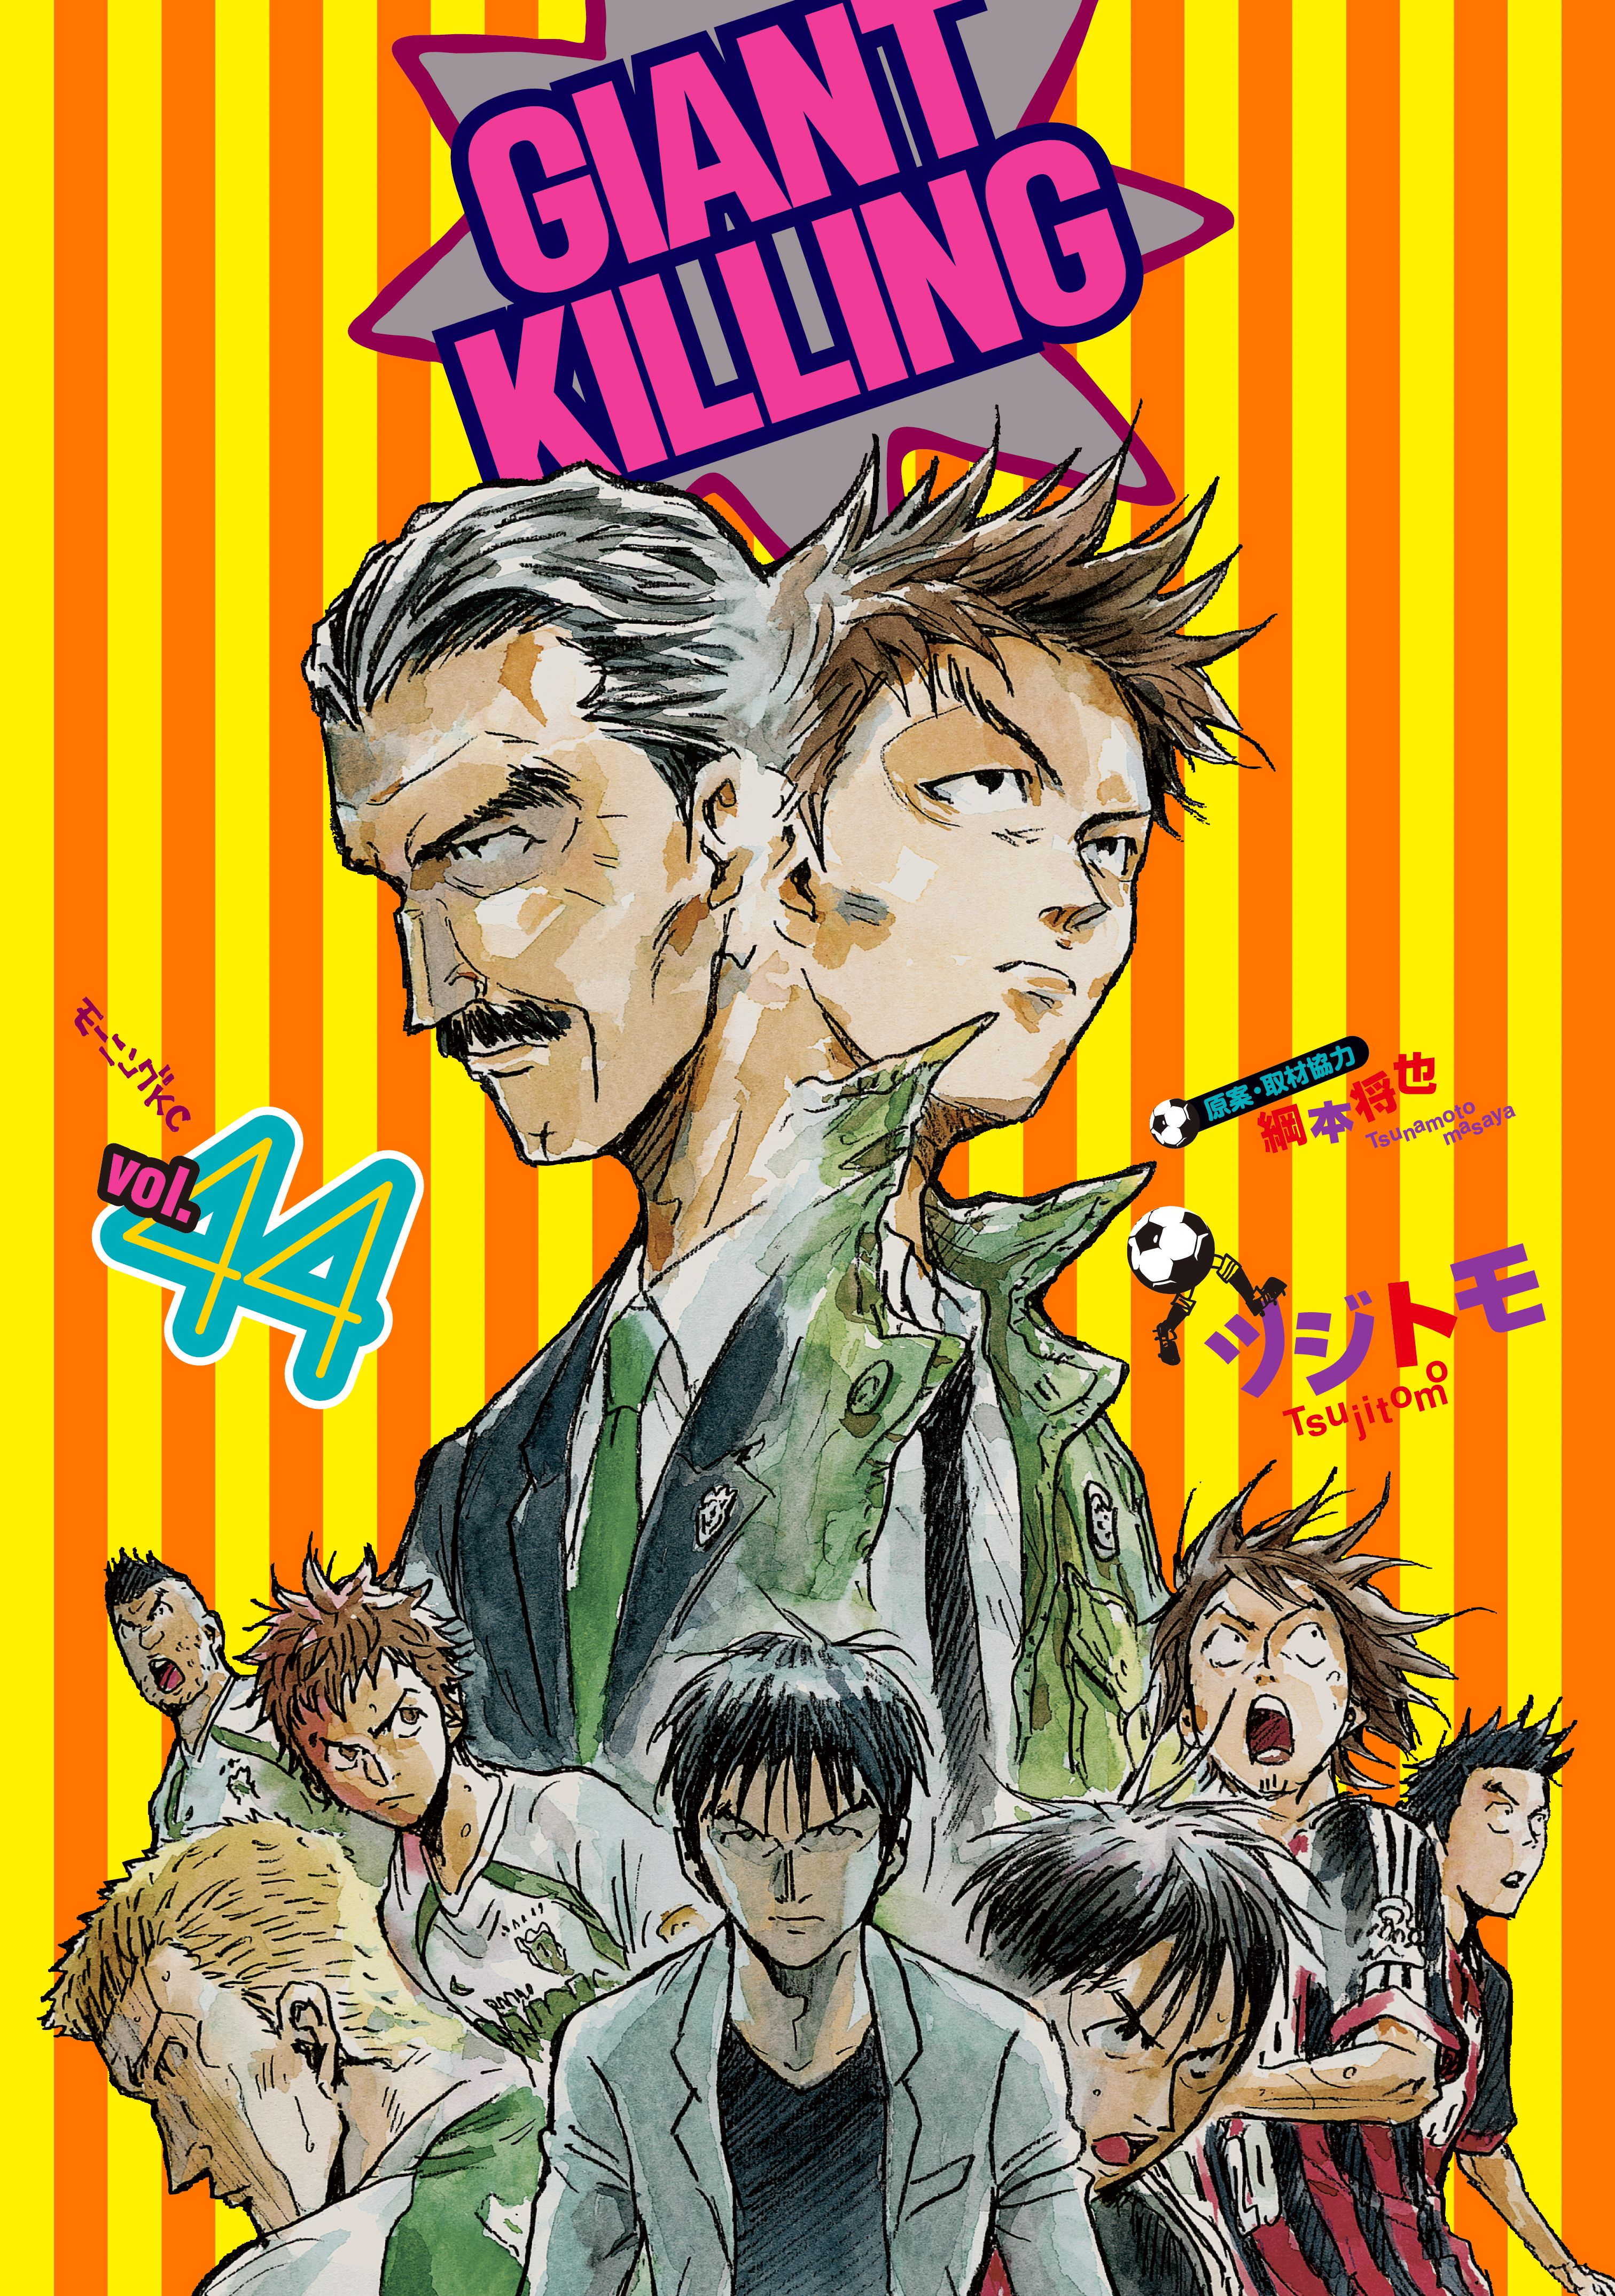 Giant killing capitulo 14, By Giant killing